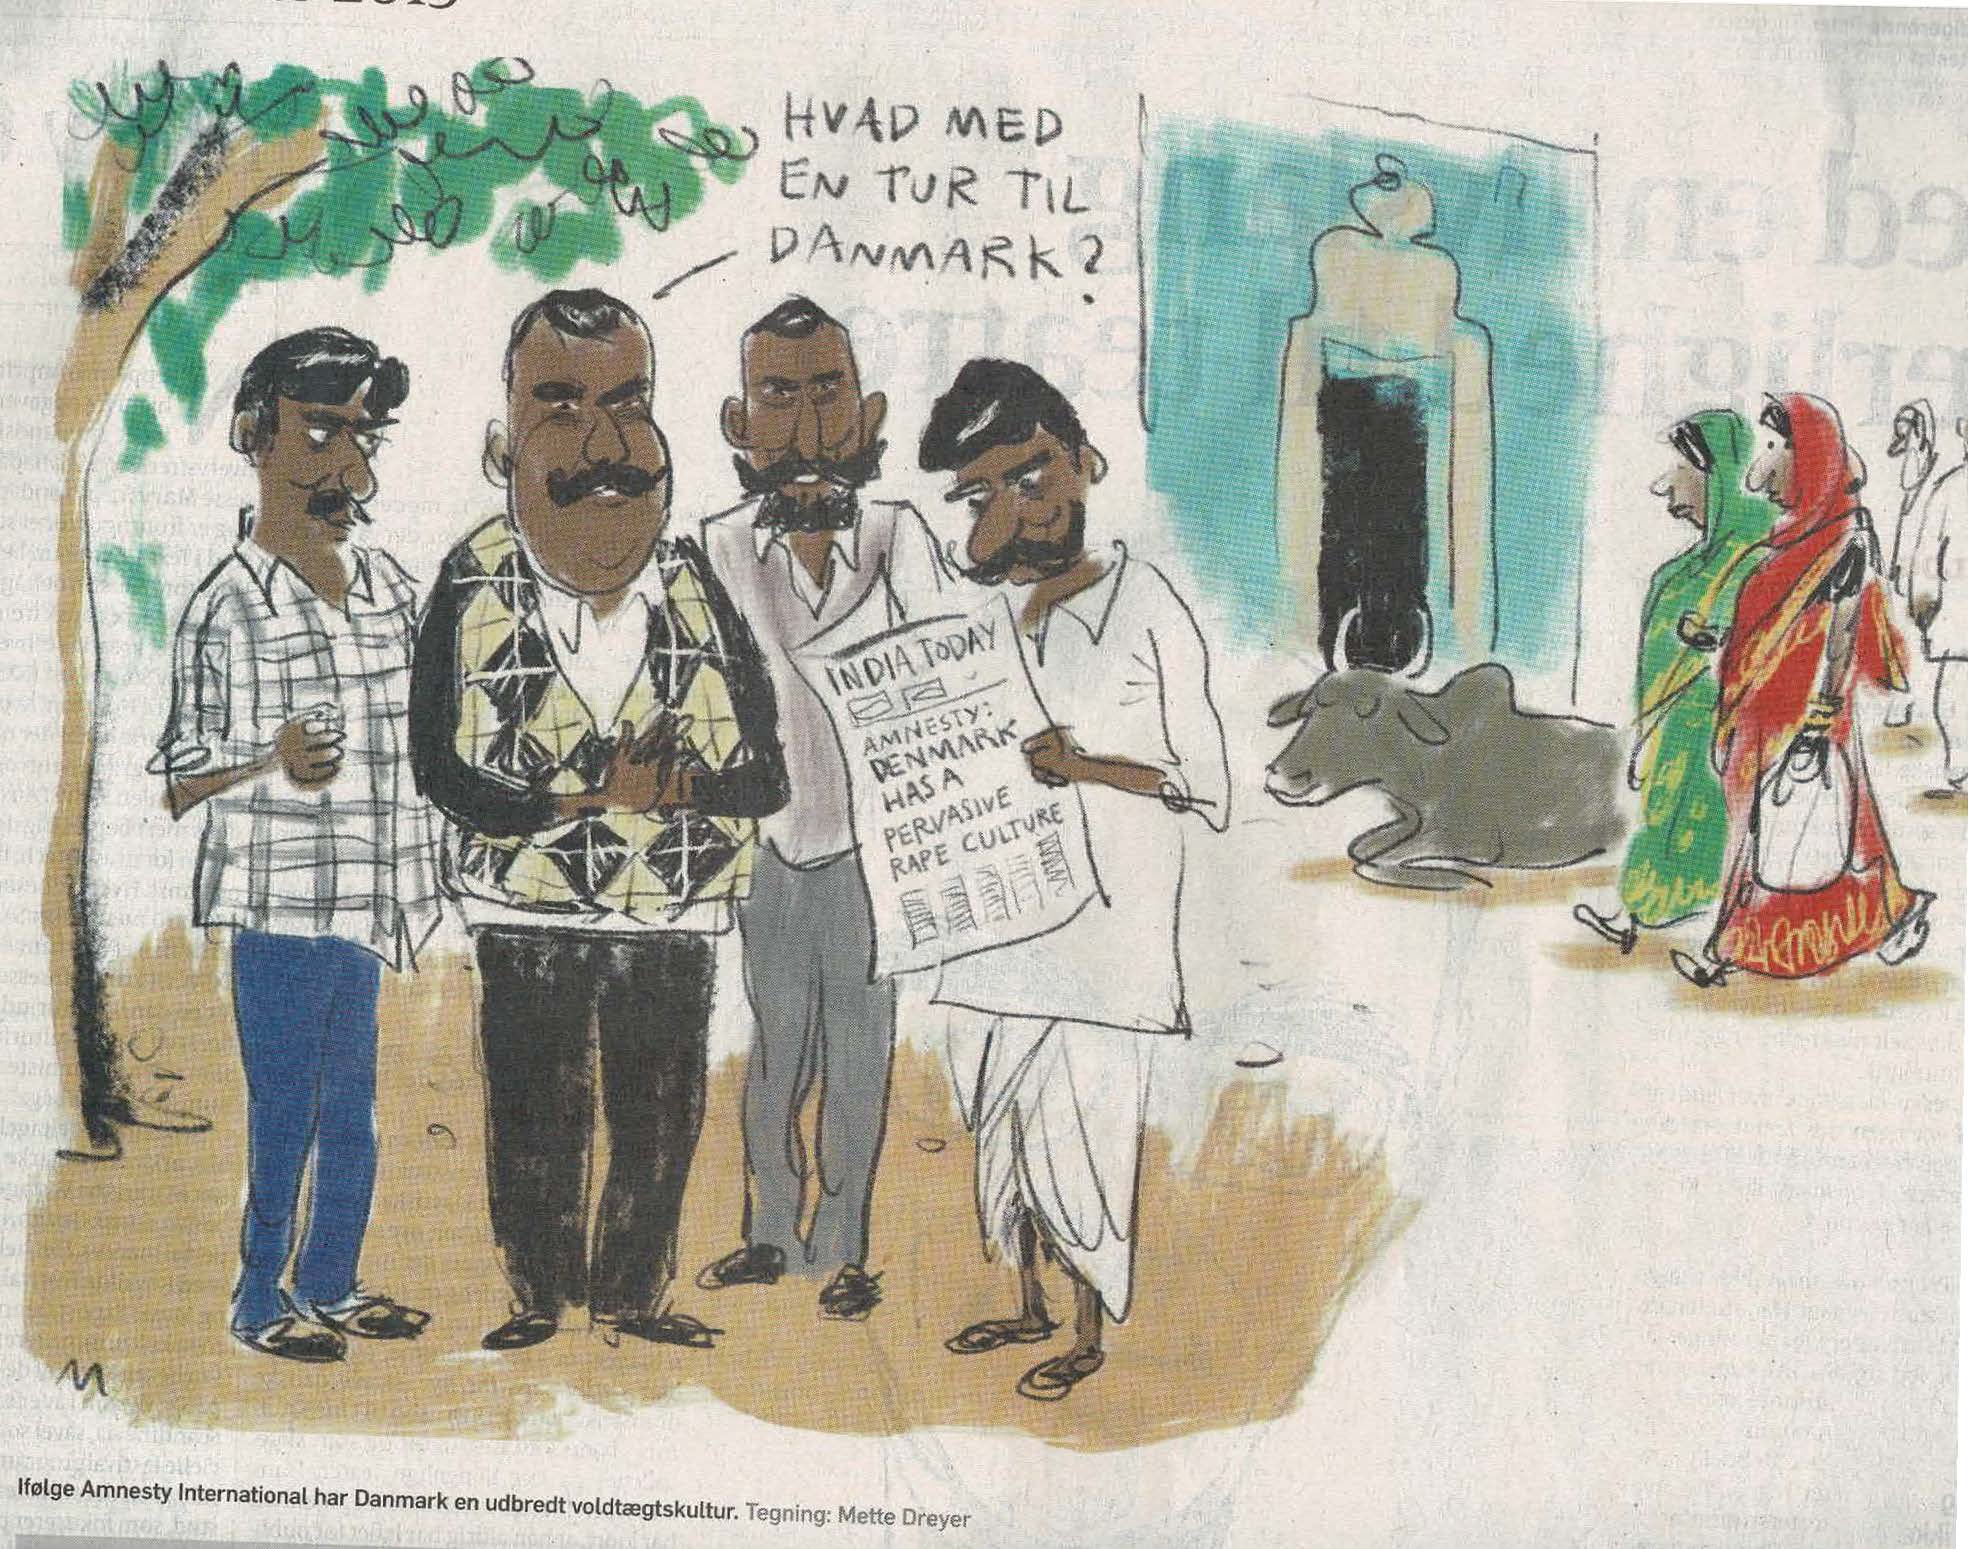 Danish newspaper lights fuse under another potential cartoon crisis – this time insulting India